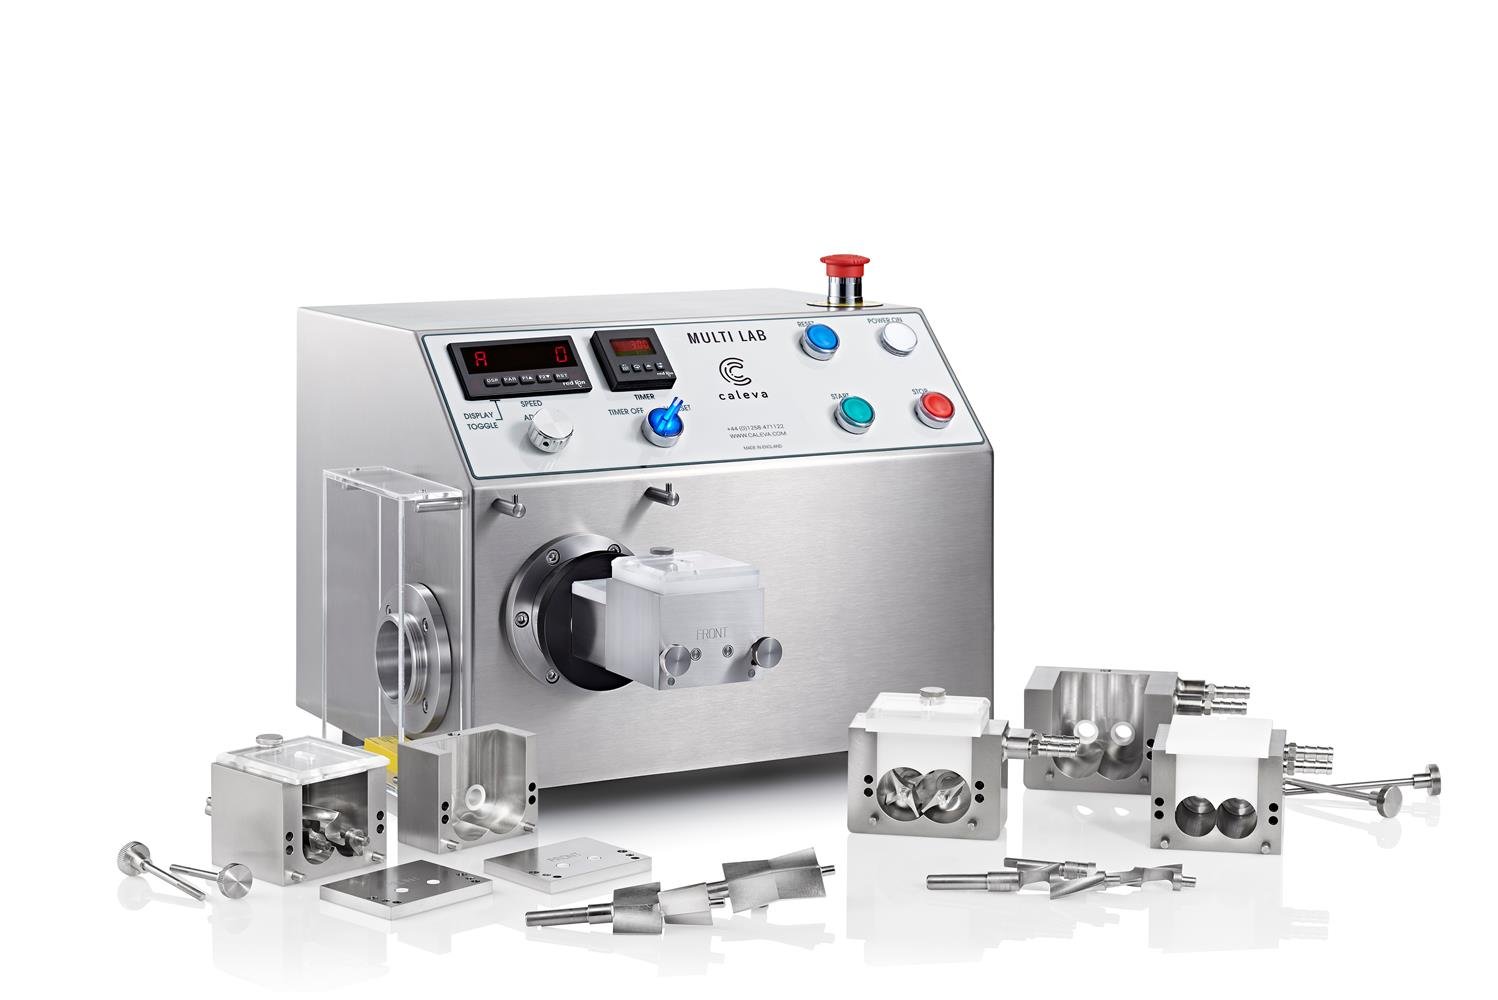 The Caleva mixer granulator blender with different mixing bowl sizes and blade configurations